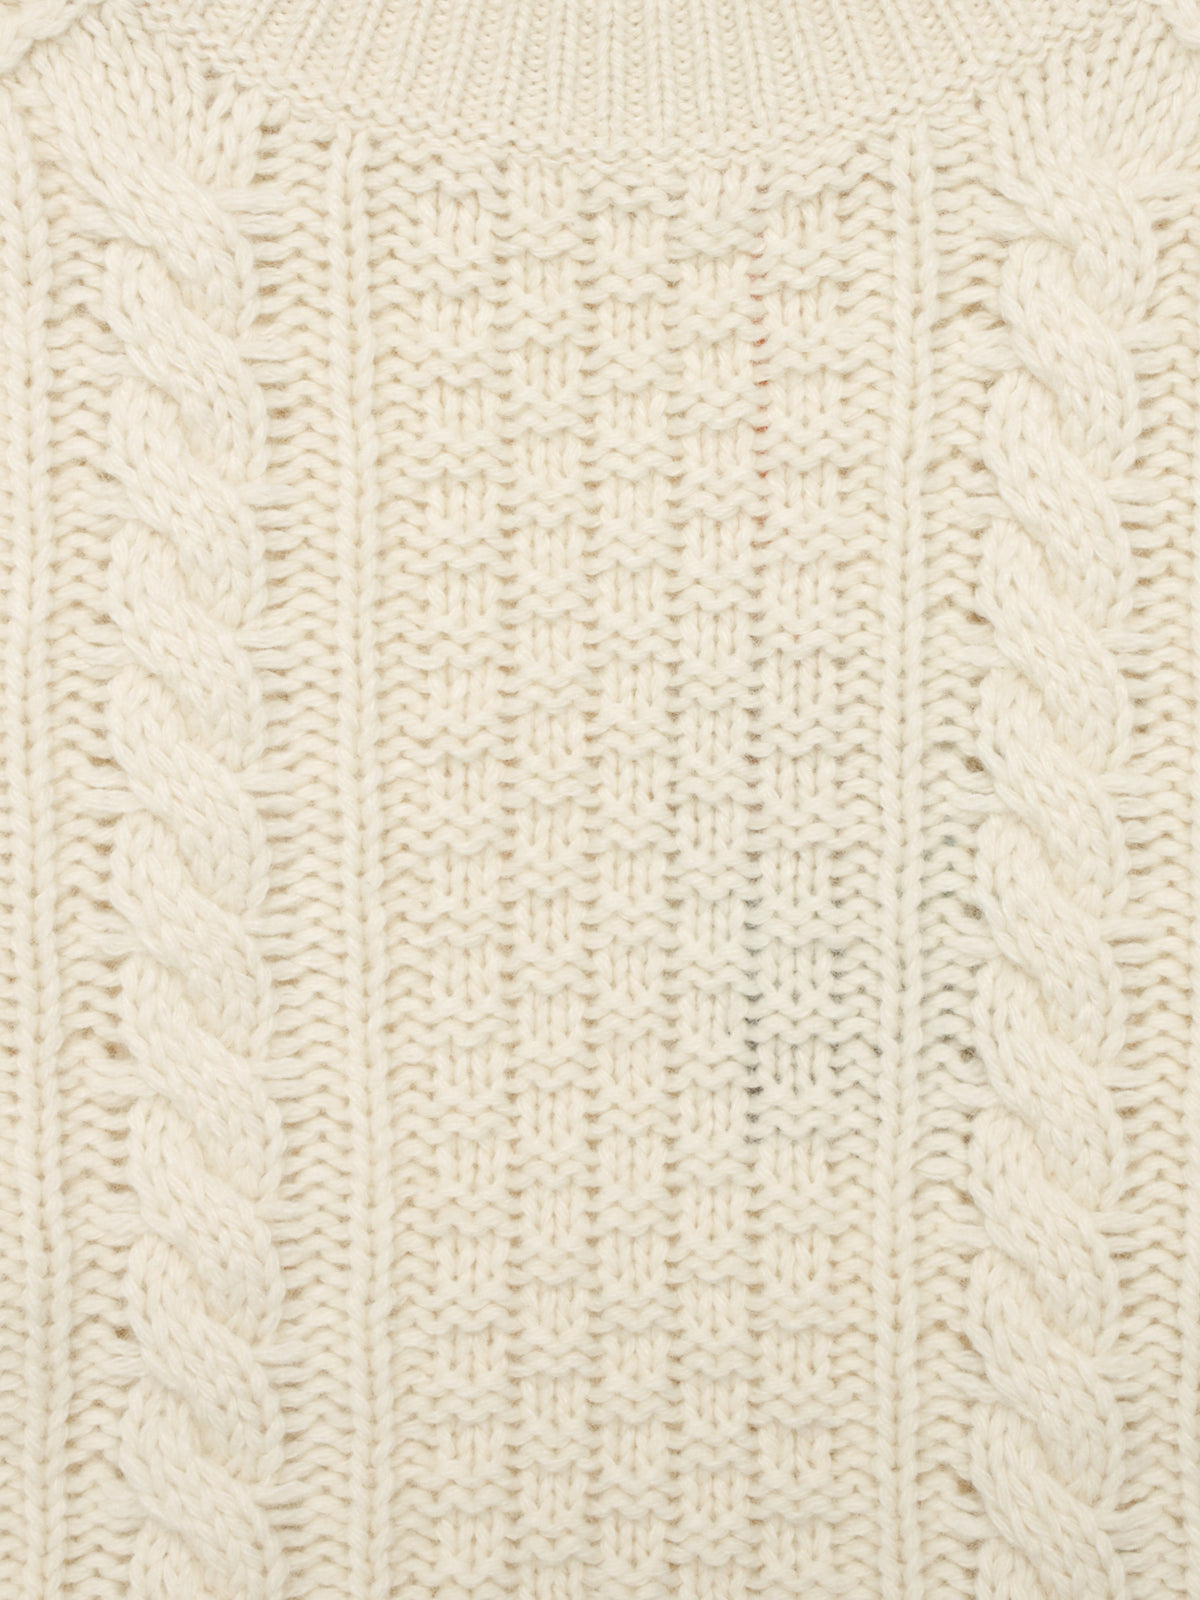 Jane Cabel Knit in White